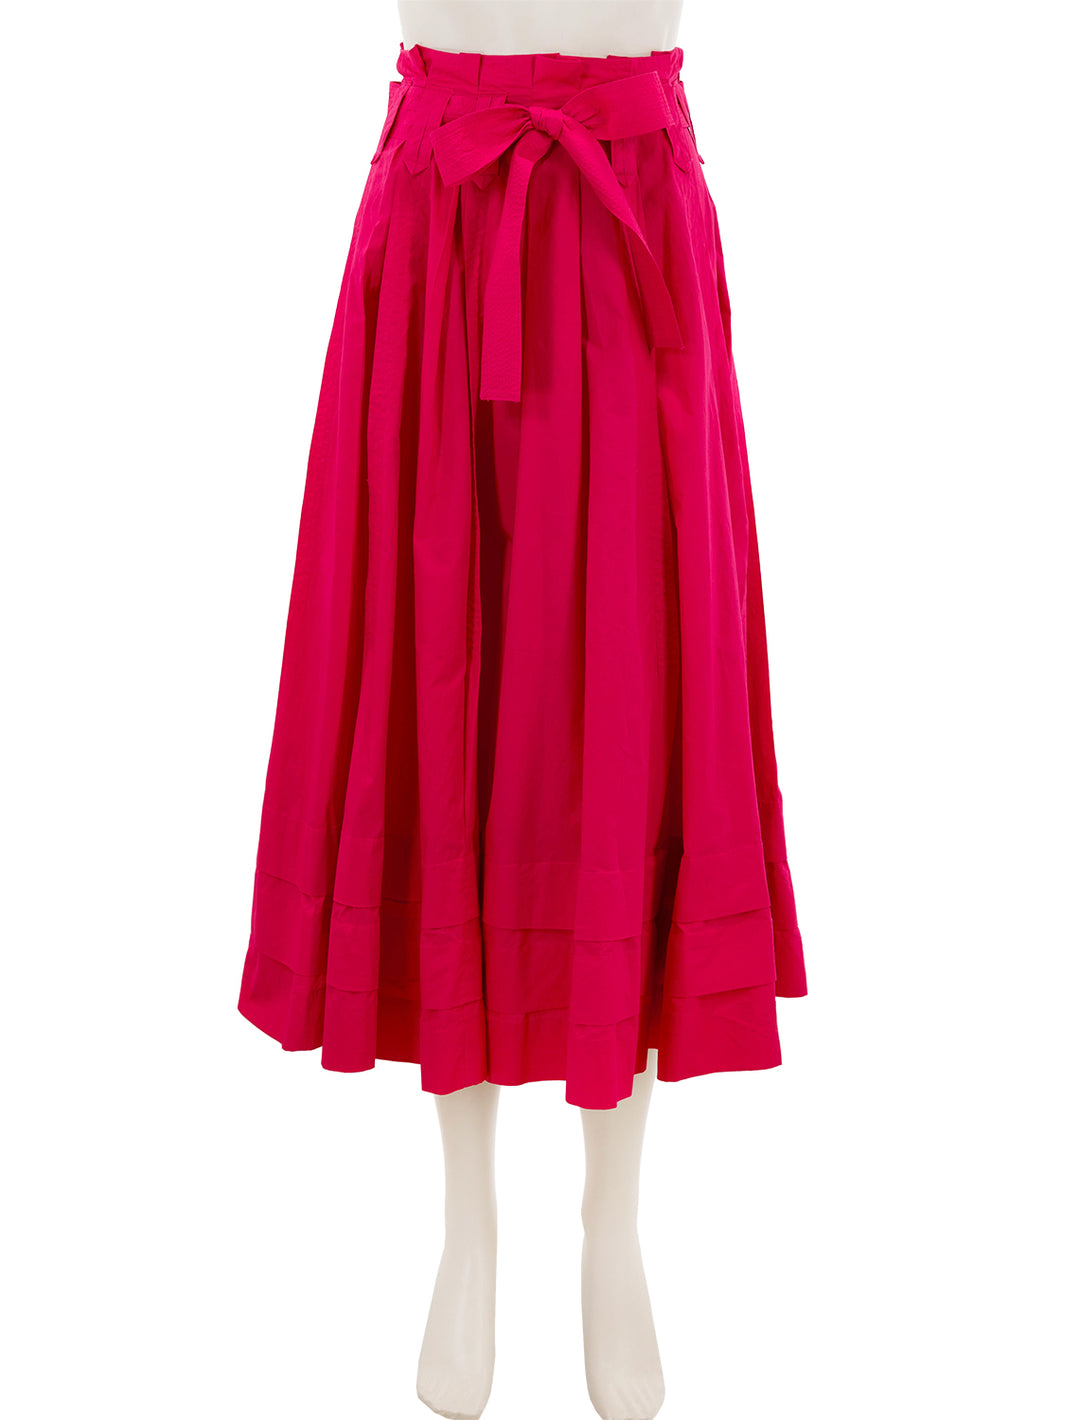 Front view of Ulla Johnson's dylan skirt in orchid.